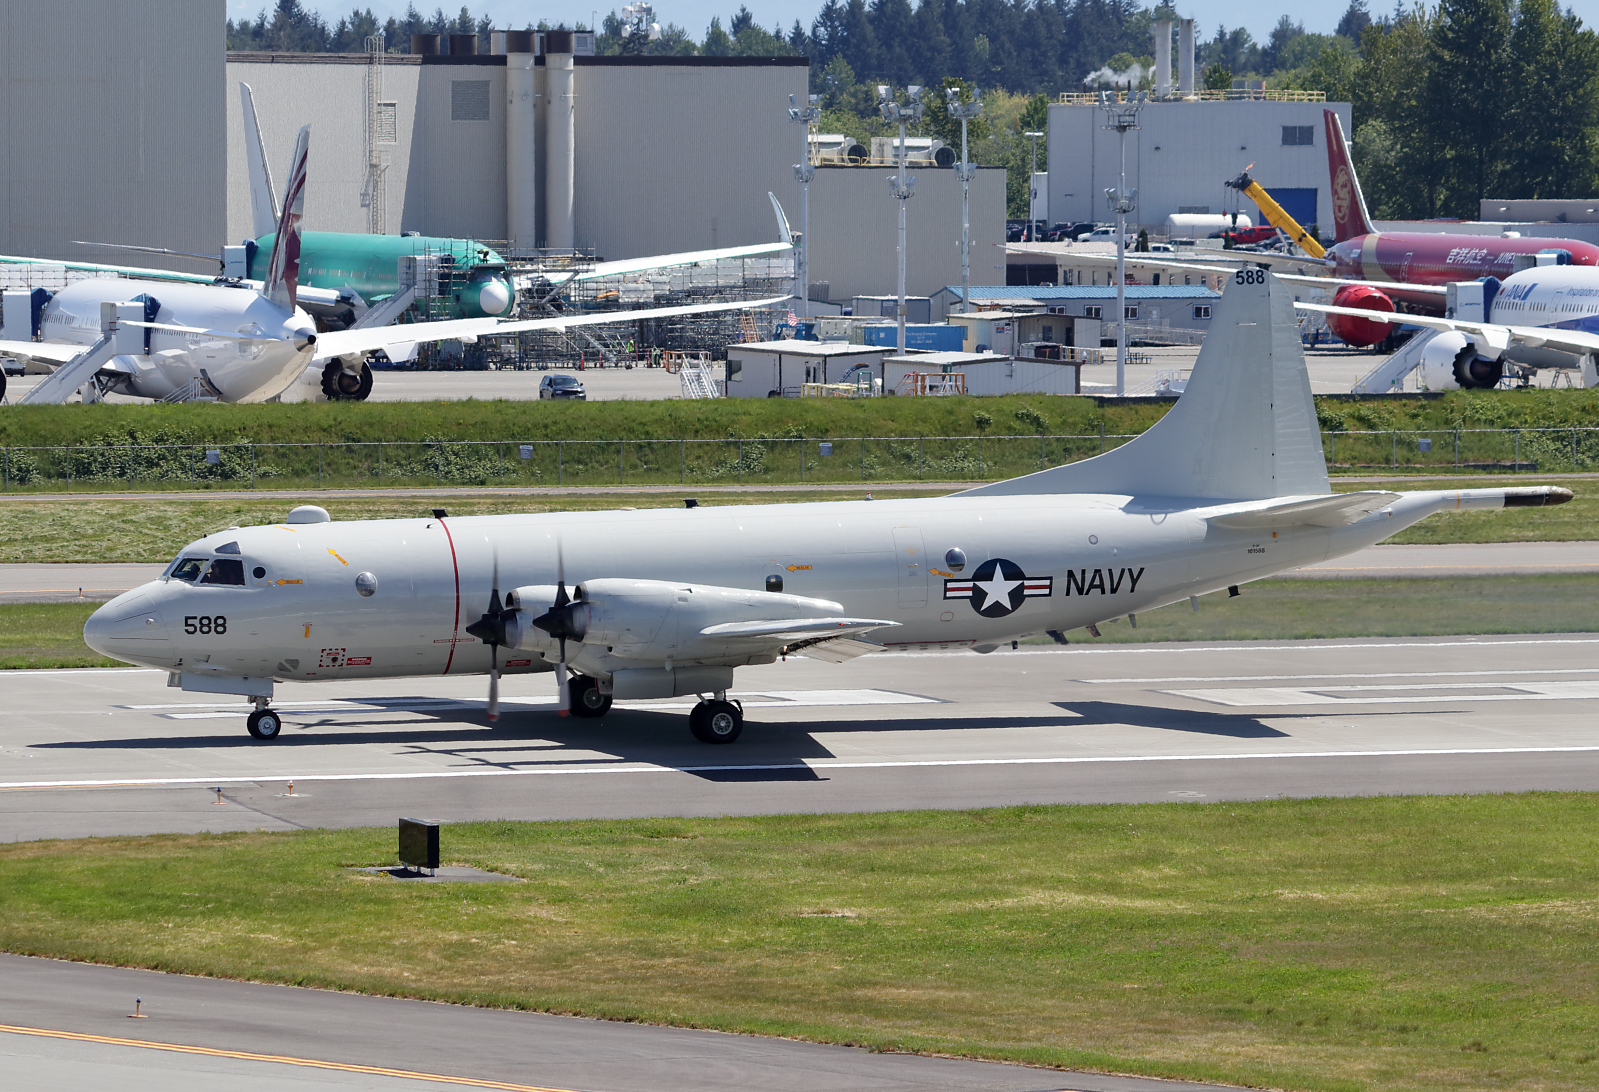 P-3C 161588 at KPAE Paine Field